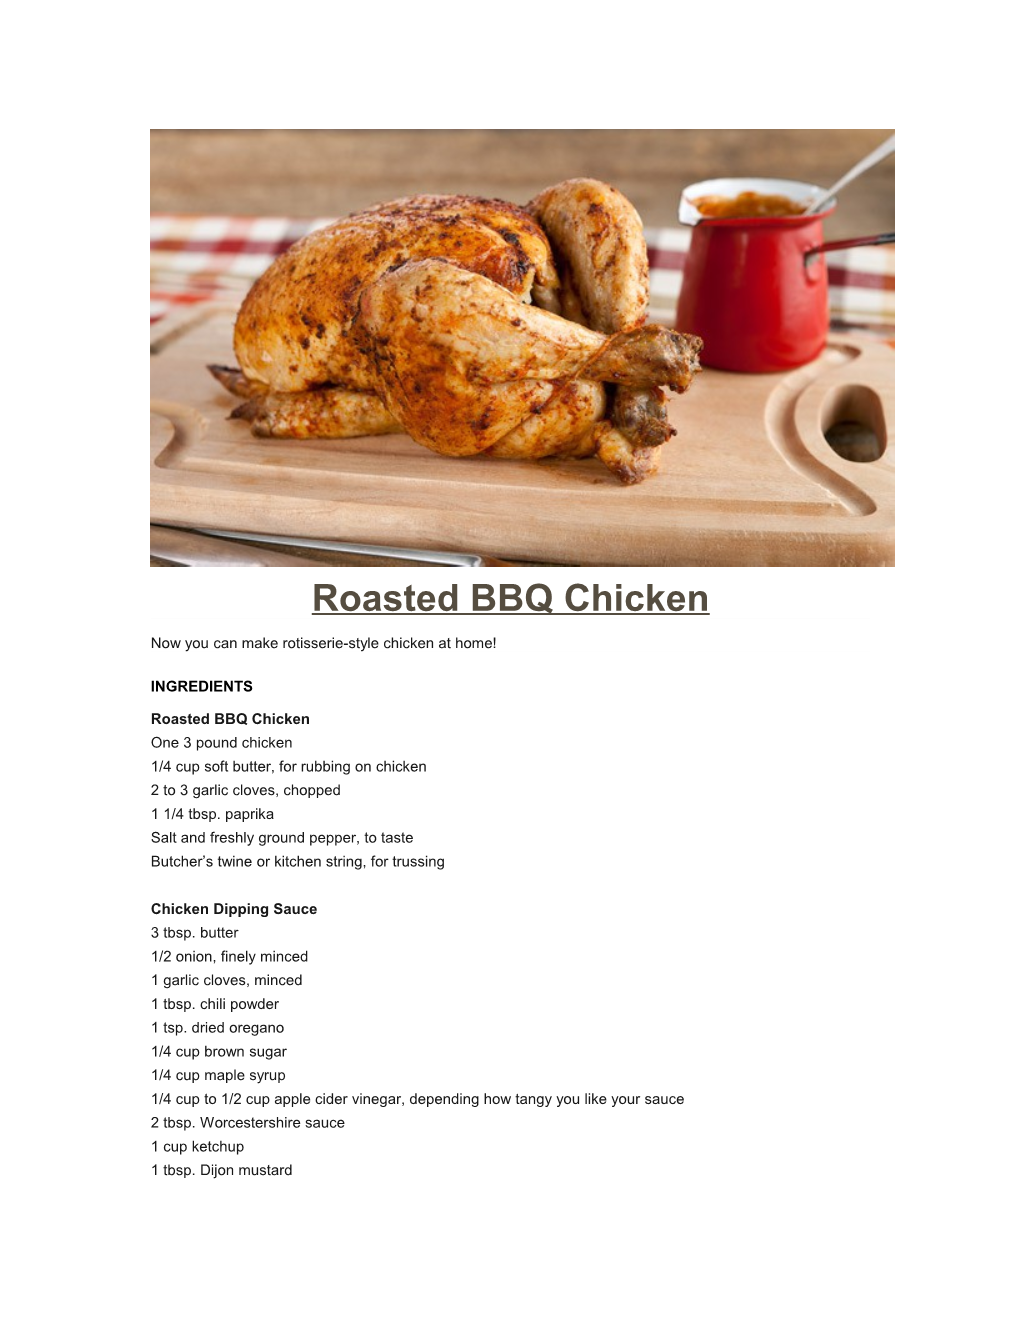 Now You Can Make Rotisserie-Style Chicken at Home!